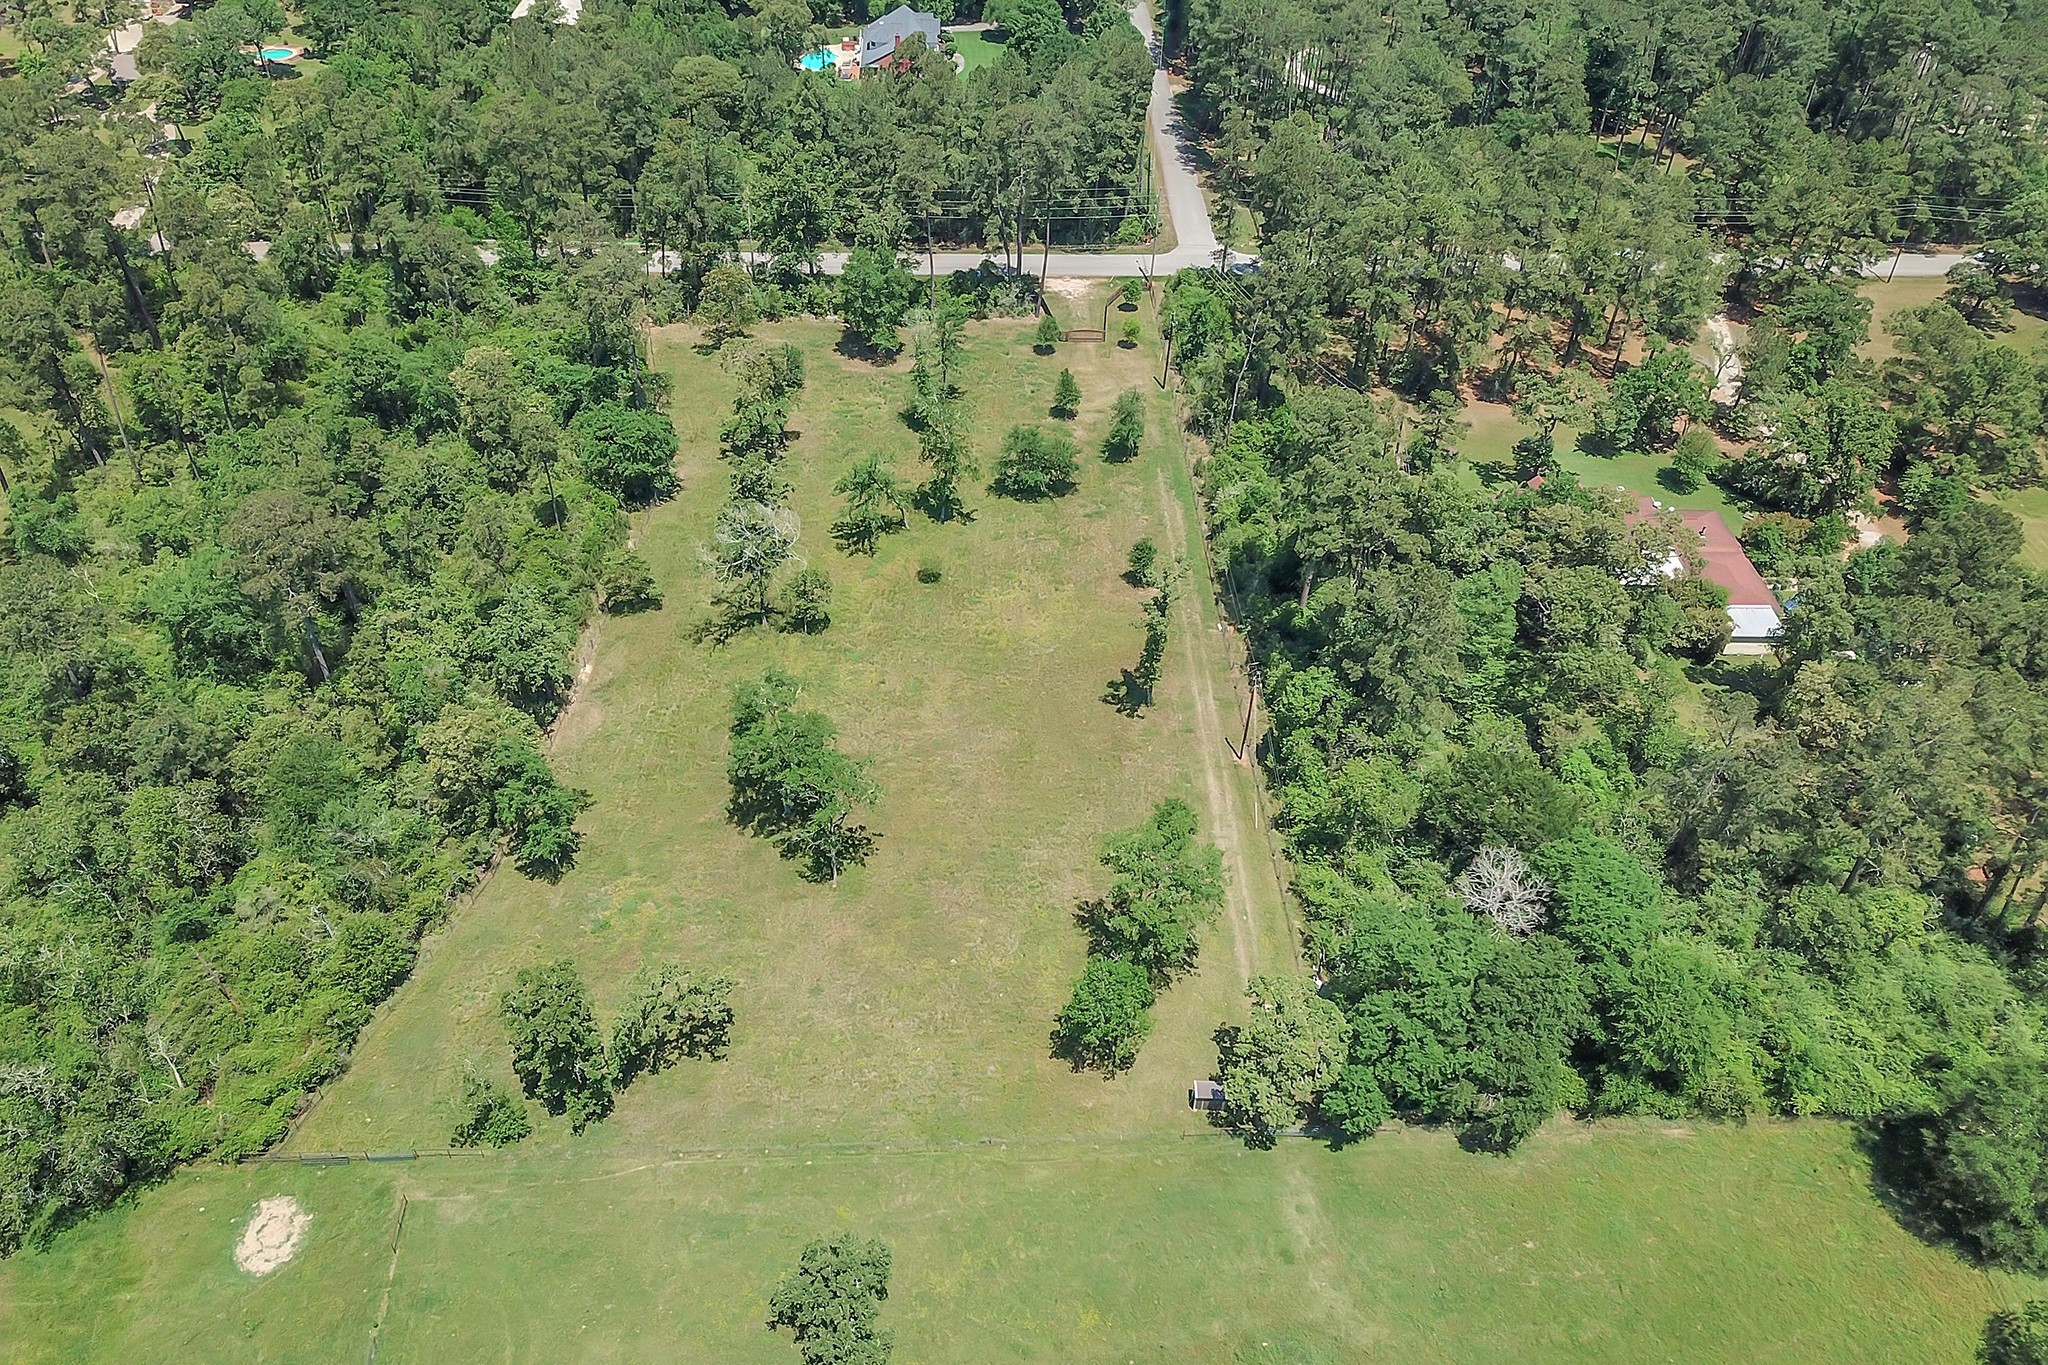 Birdseye view of 3 acre tract from rear of property facing Stagecoach Rd.